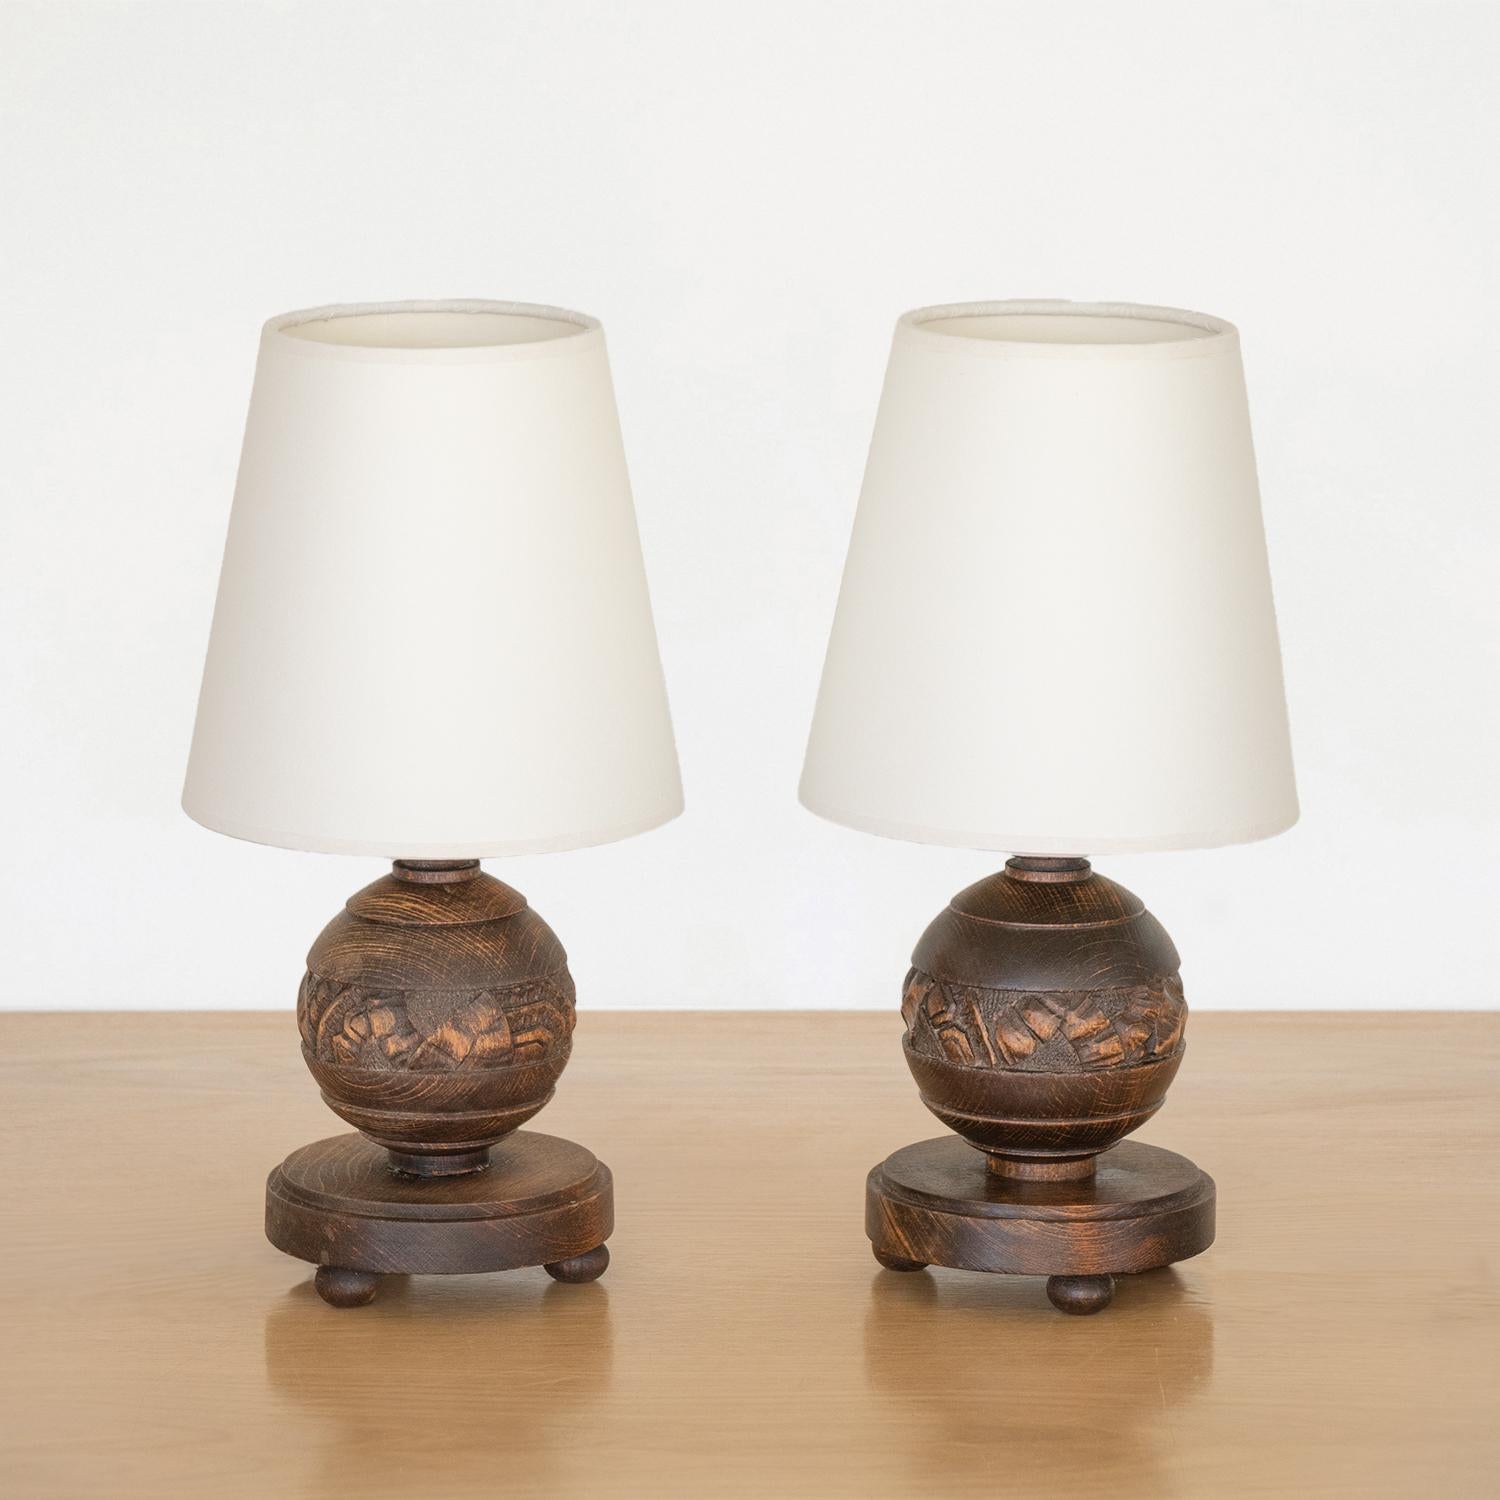 Pair of petite wood table lamps from France, 1940s. Carved wood ball forms with circular base and three petite wood ball feet. Original wood finish with beautiful carved floral detail. New tapered paper shades and newly re-wired. Each takes one E12